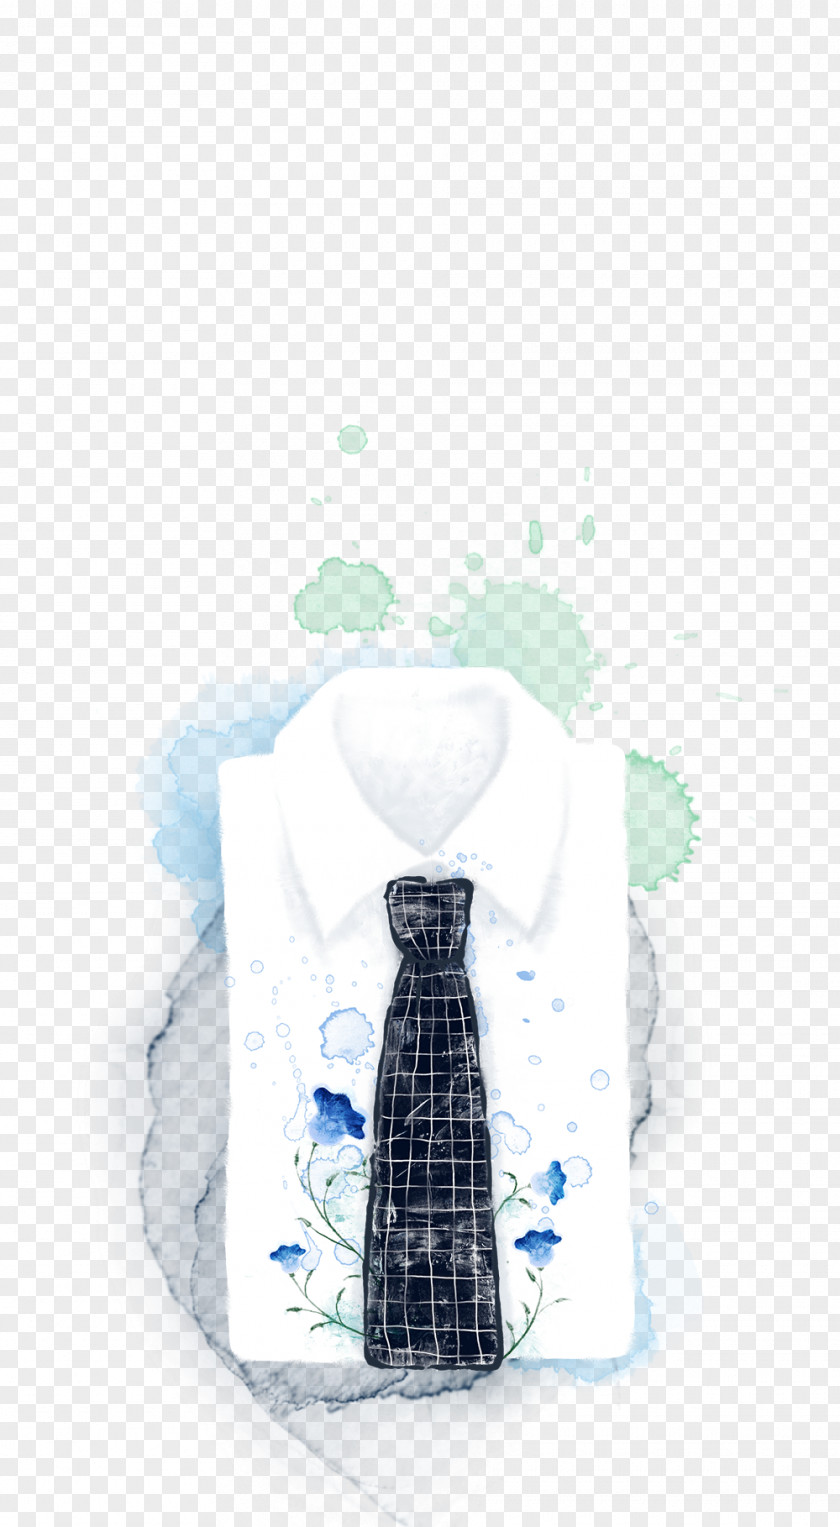 Ink Background And Shirt Watercolor Painting Poster Illustration PNG